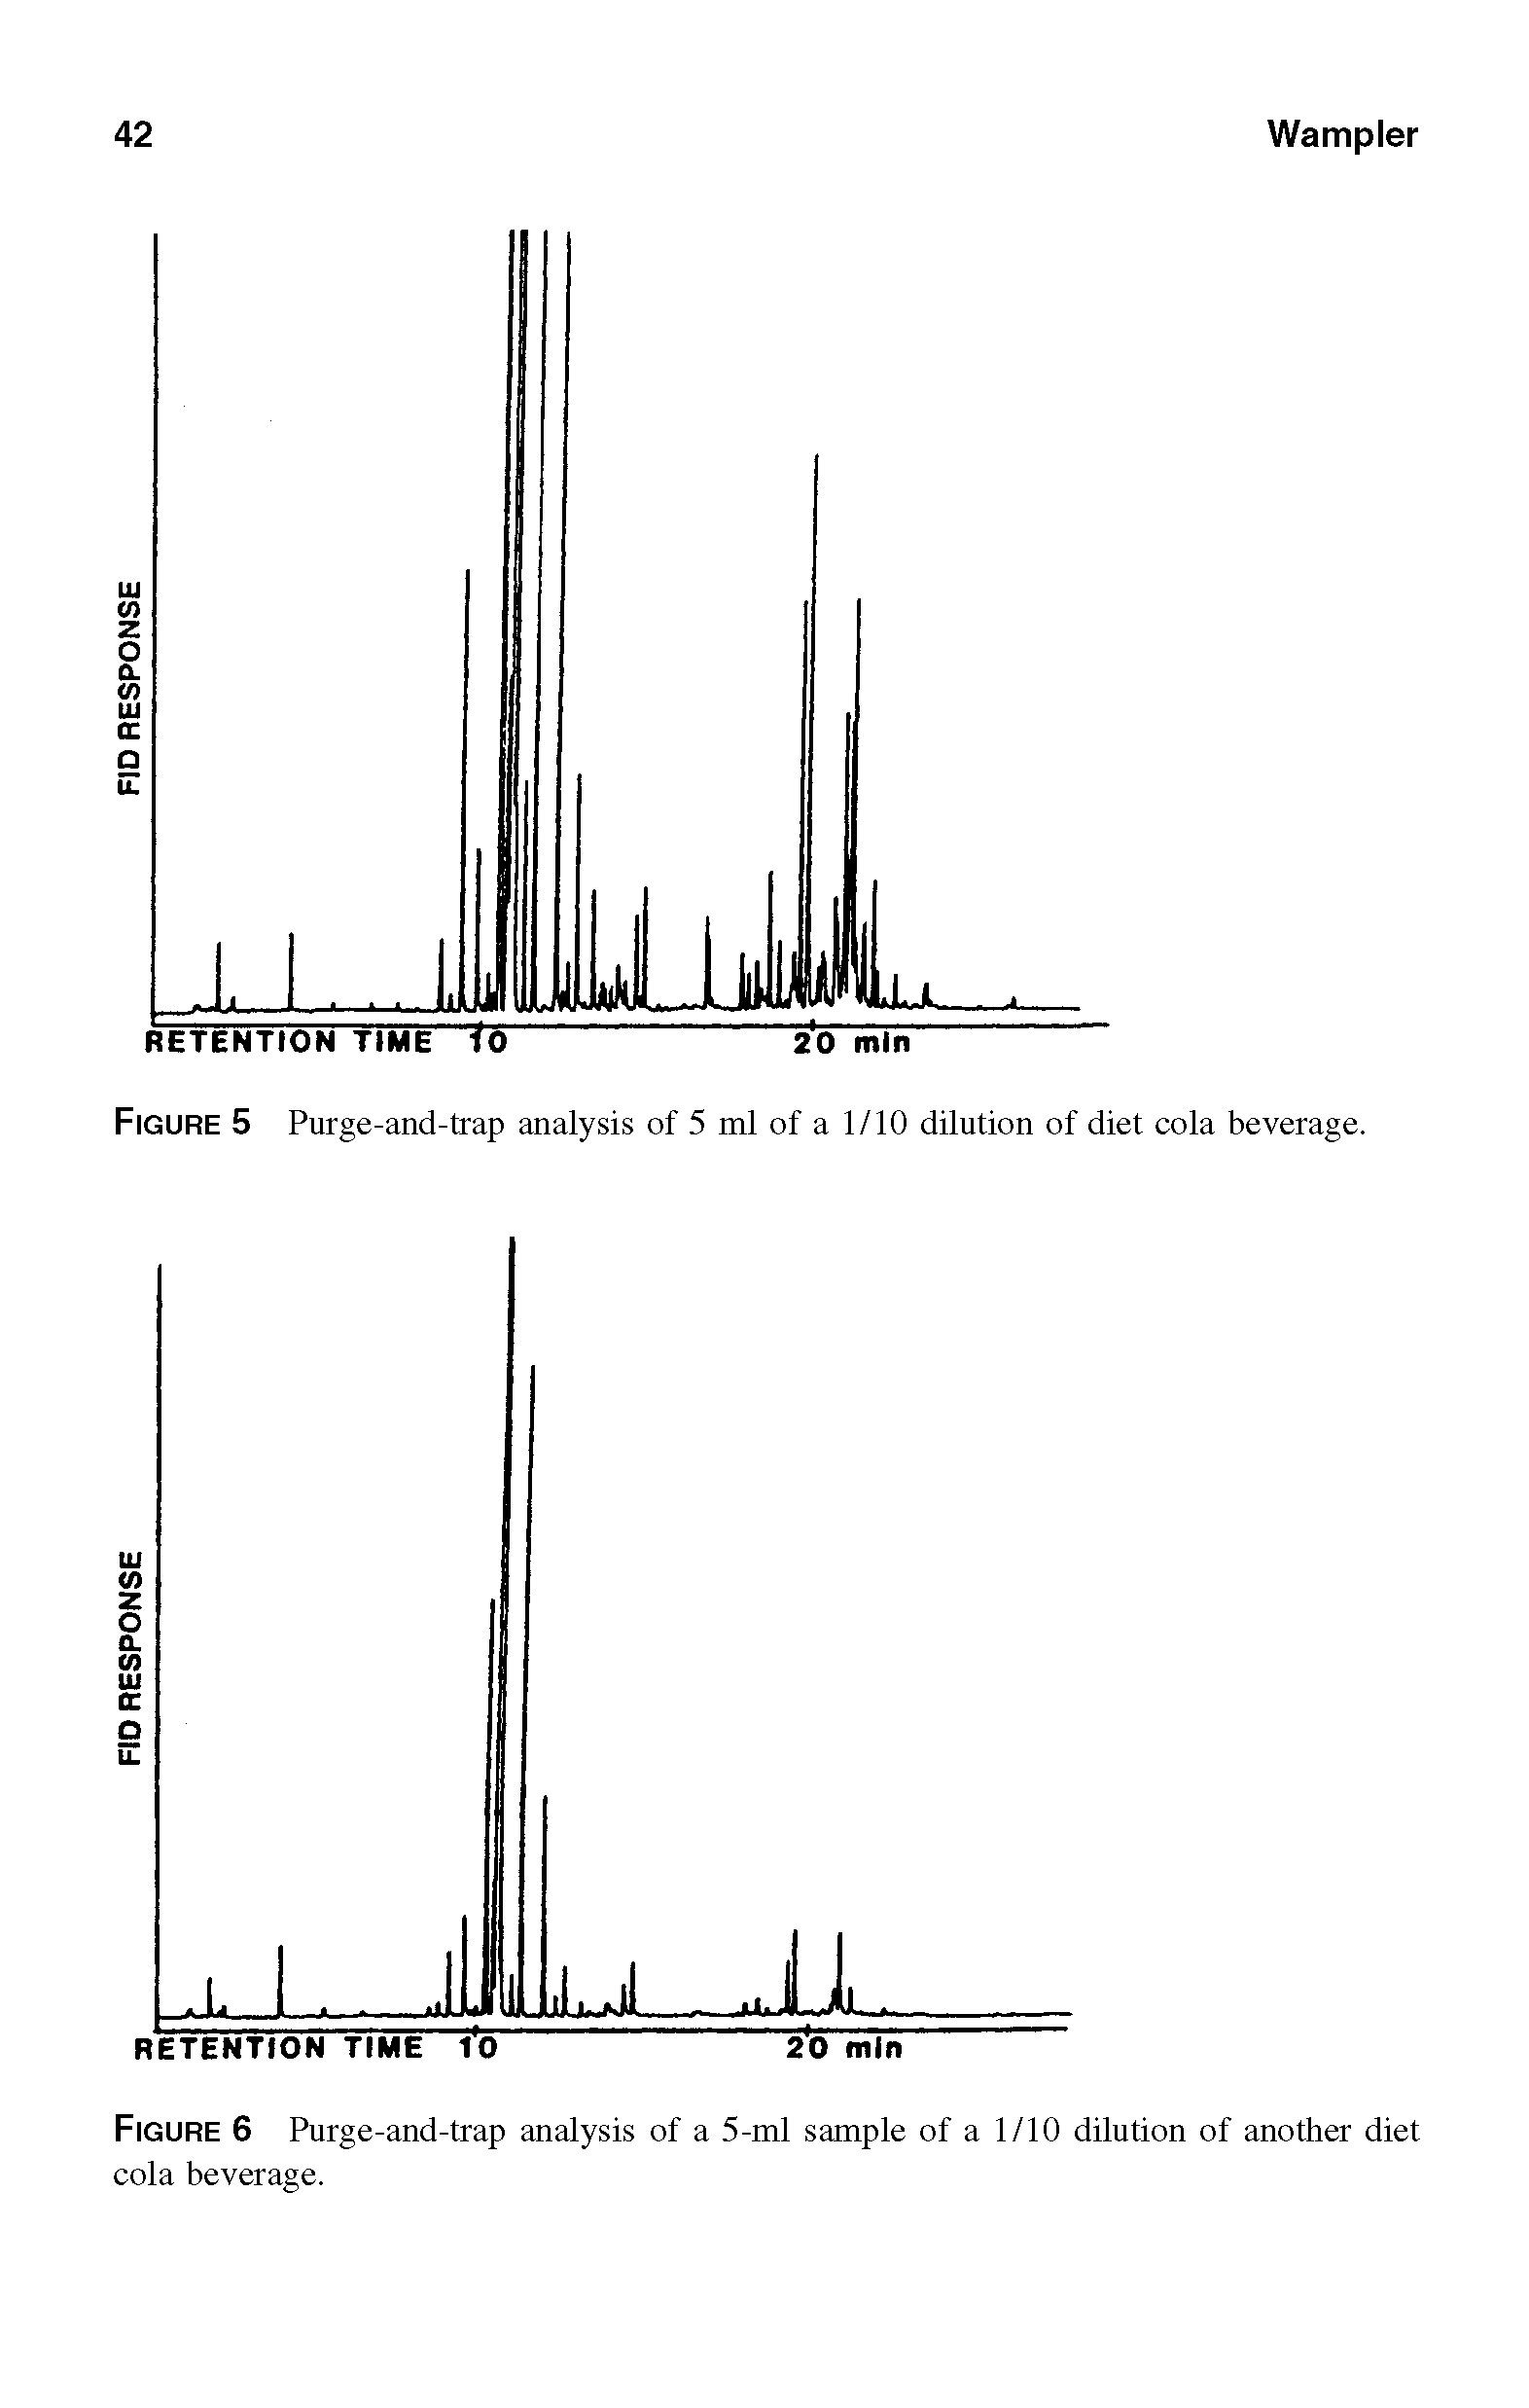 Figure 5 Purge-and-trap analysis of 5 ml of a 1/10 dilution of diet cola beverage.